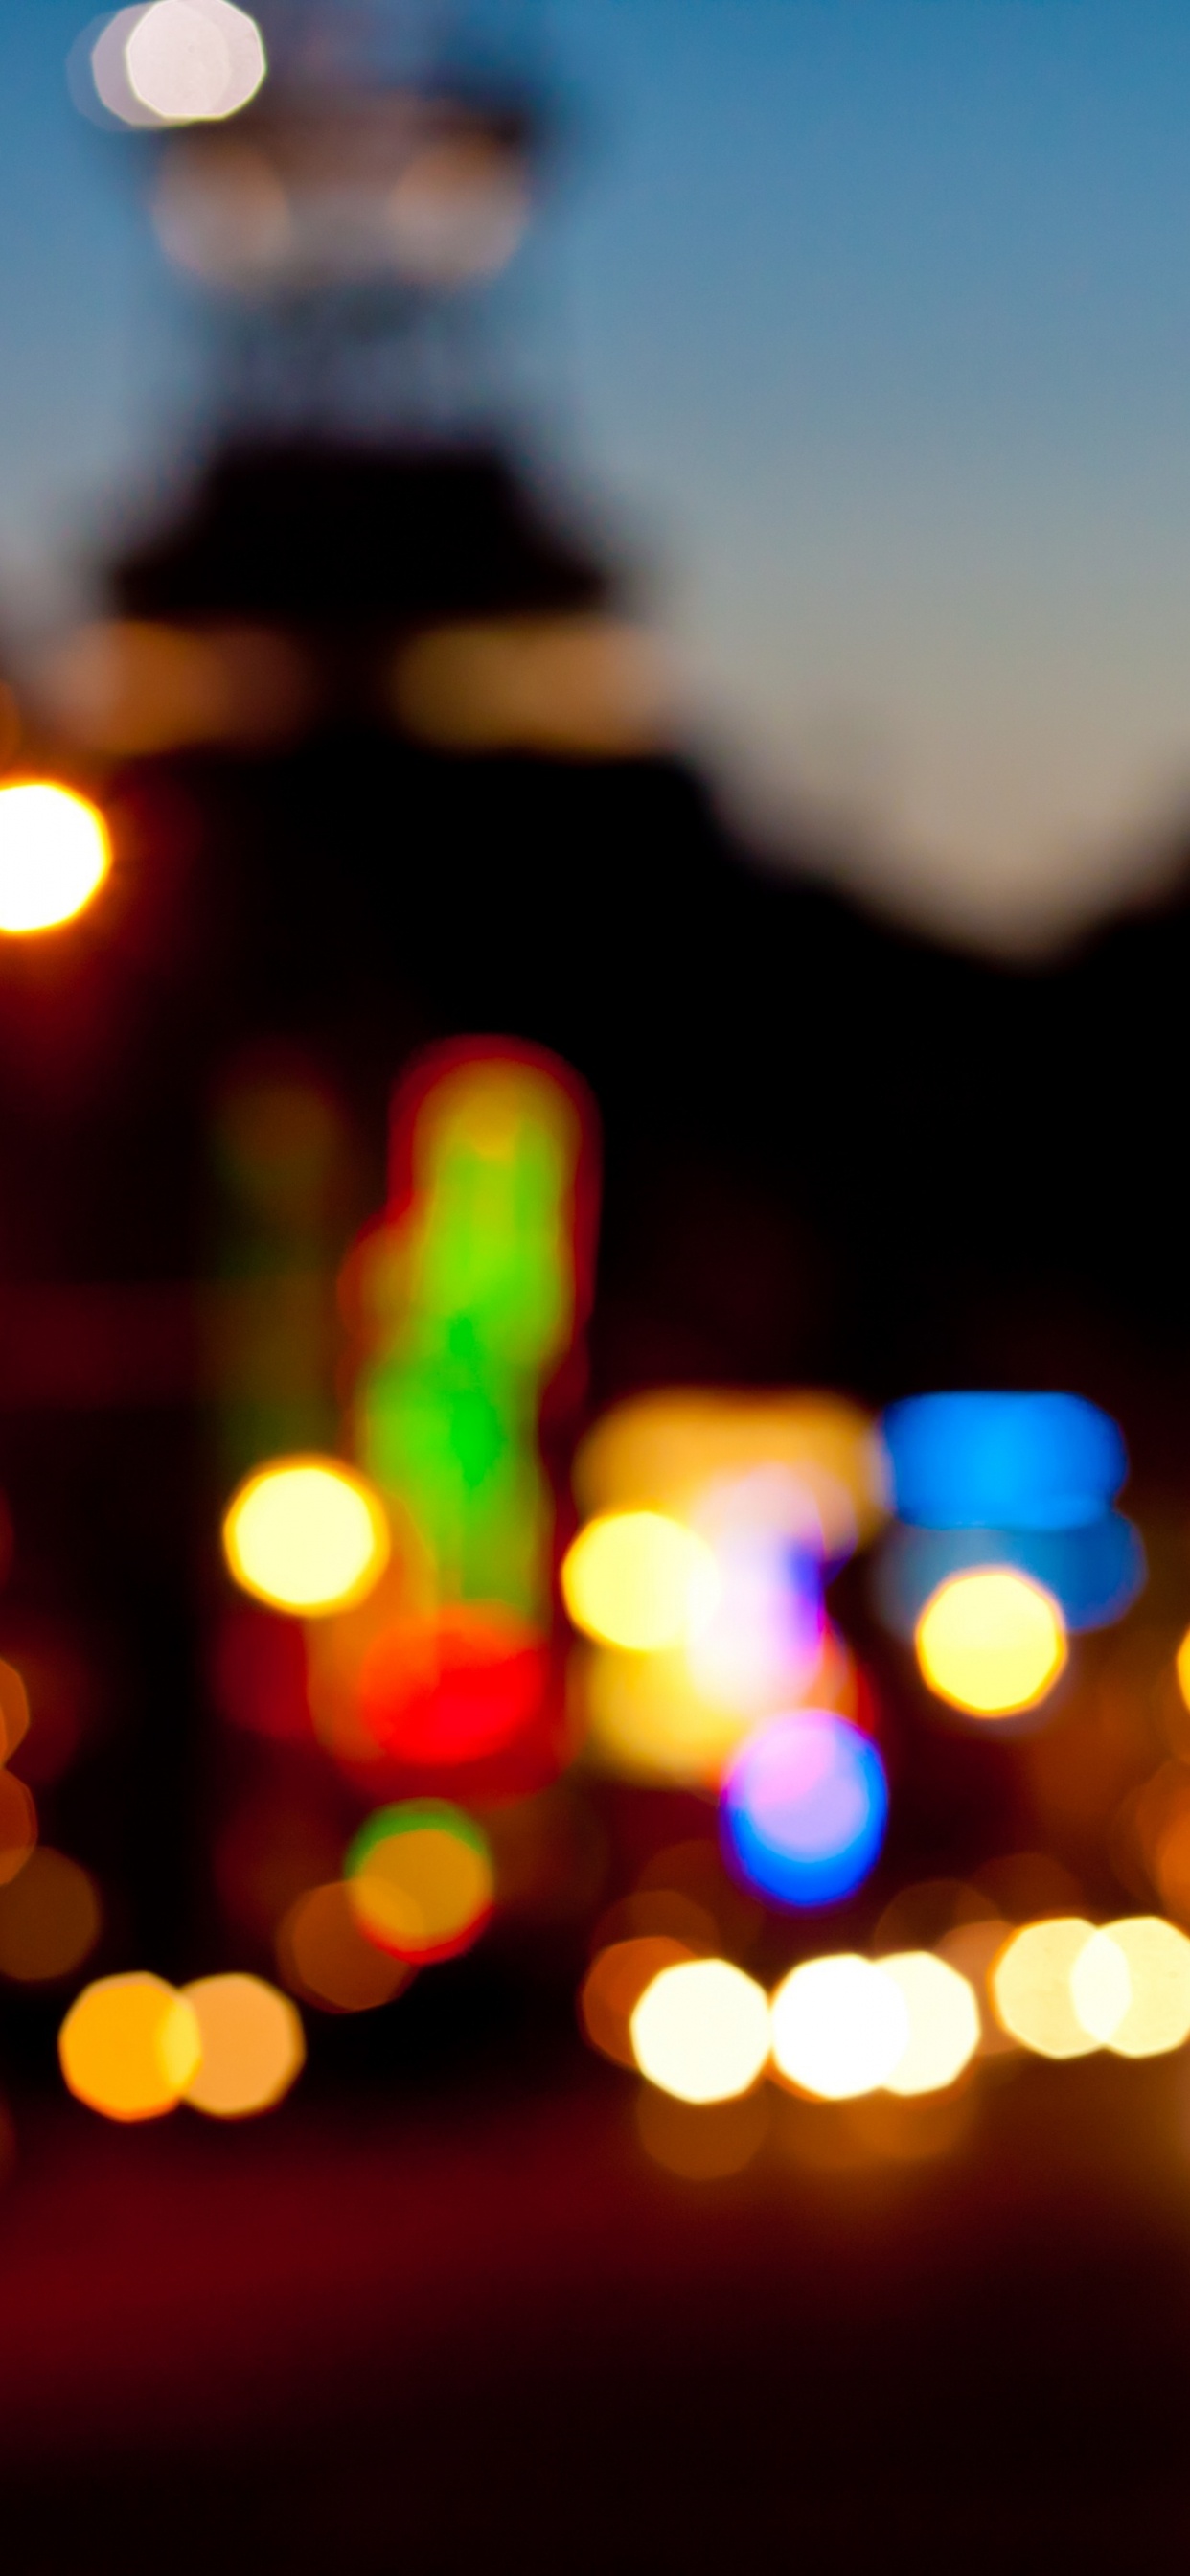 Bokeh Photography of City Lights During Night Time. Wallpaper in 1242x2688 Resolution